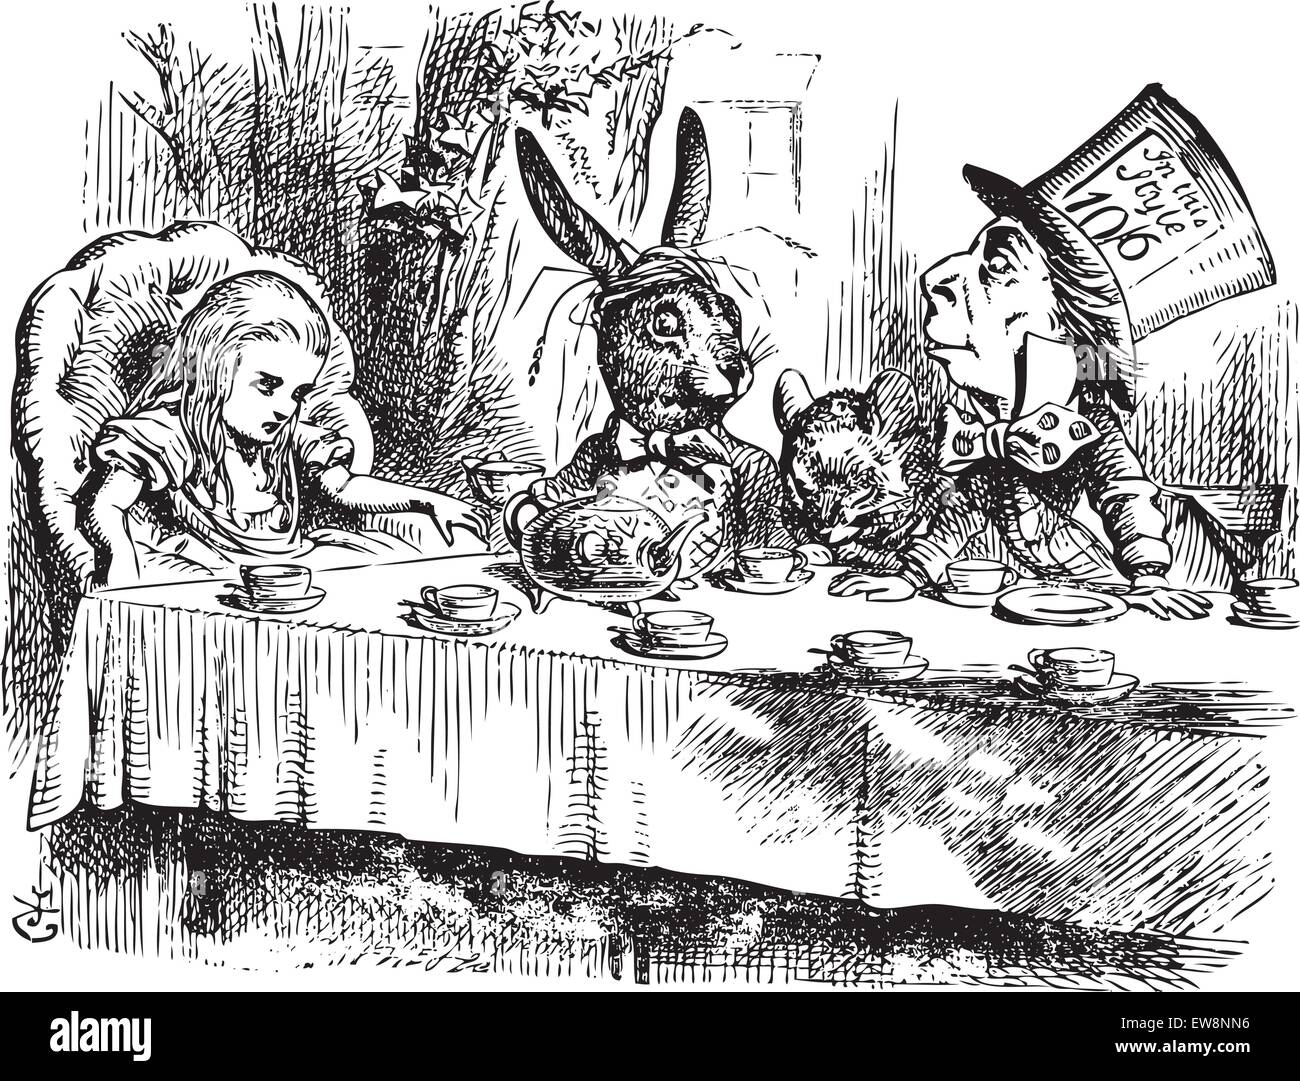 Mad Hatter’s Tea Party, Alice in Wonderland original vintage engraving. Tea party with the Mad Hatter, Dormouse and the White Rabbit. Alice's Adventures in Wonderland. Illustration from John Tenniel, published in 1865. Stock Vector